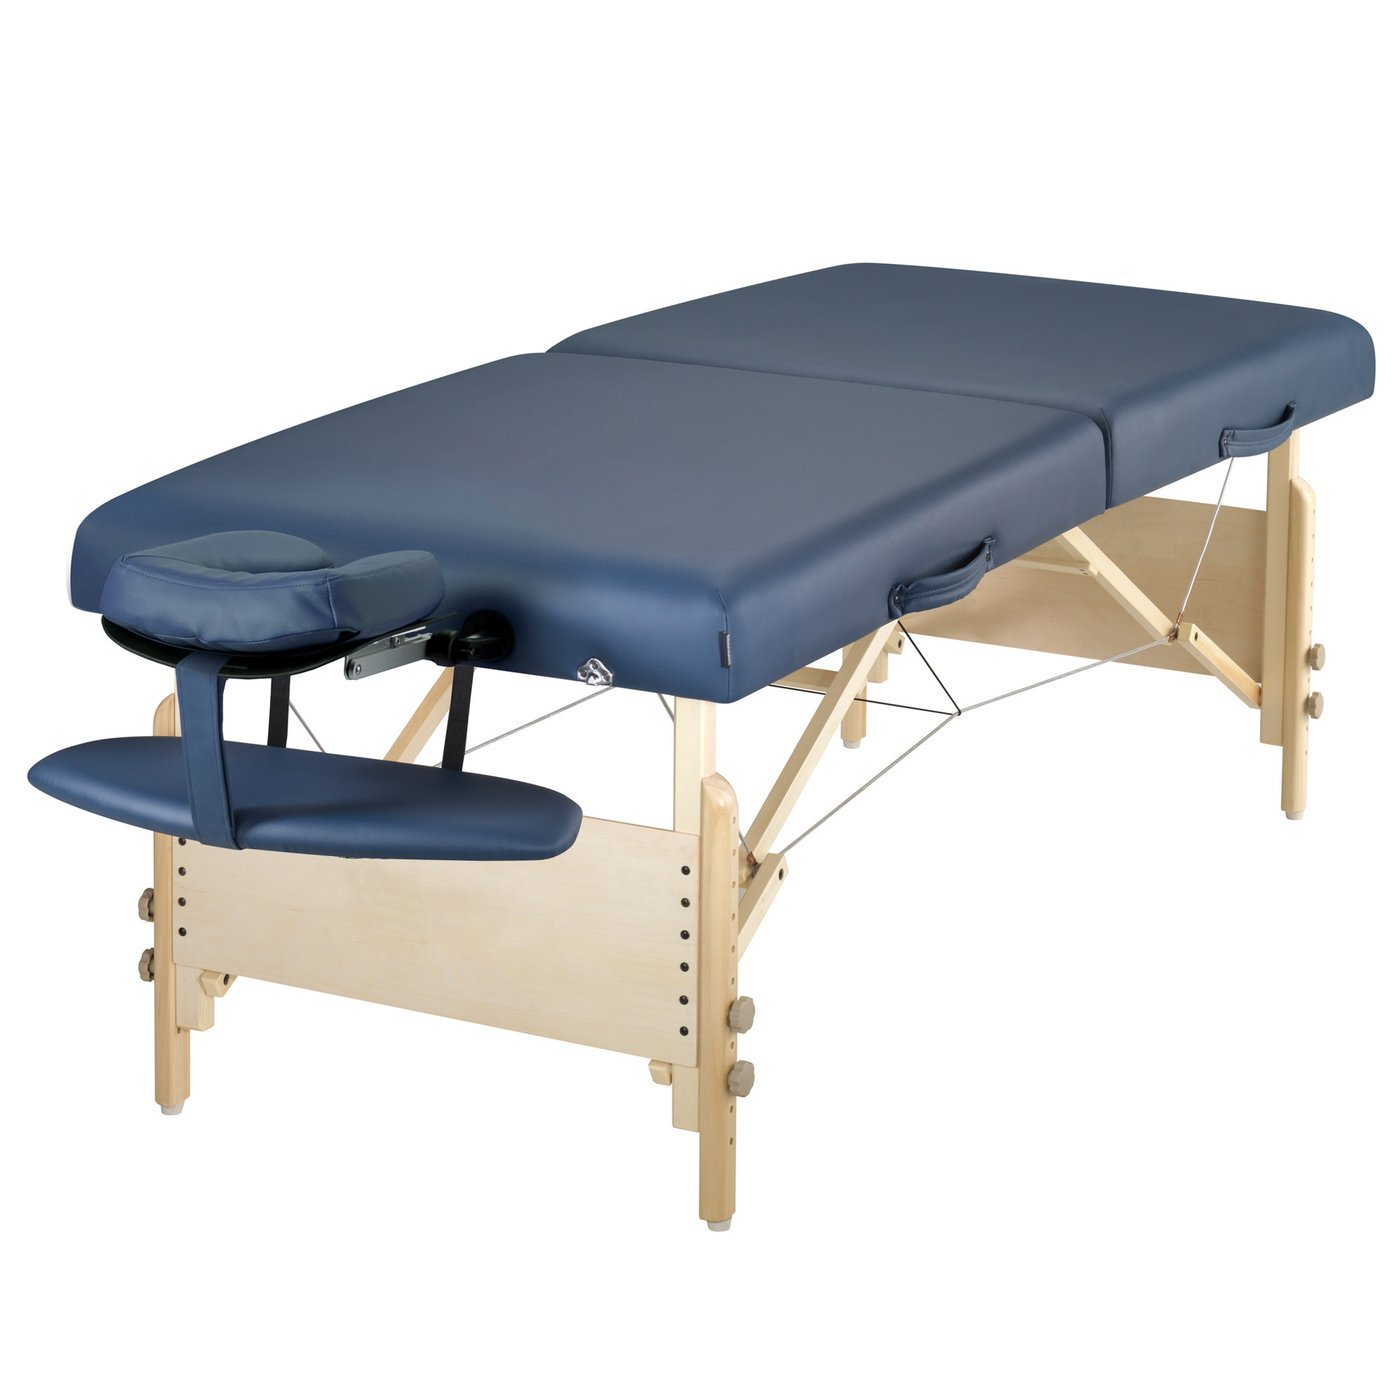 30" CORONADO™ Portable Massage Table Package with 3" Thick Cushion of Foam for Maximum Comfort! (Royal Blue Color)